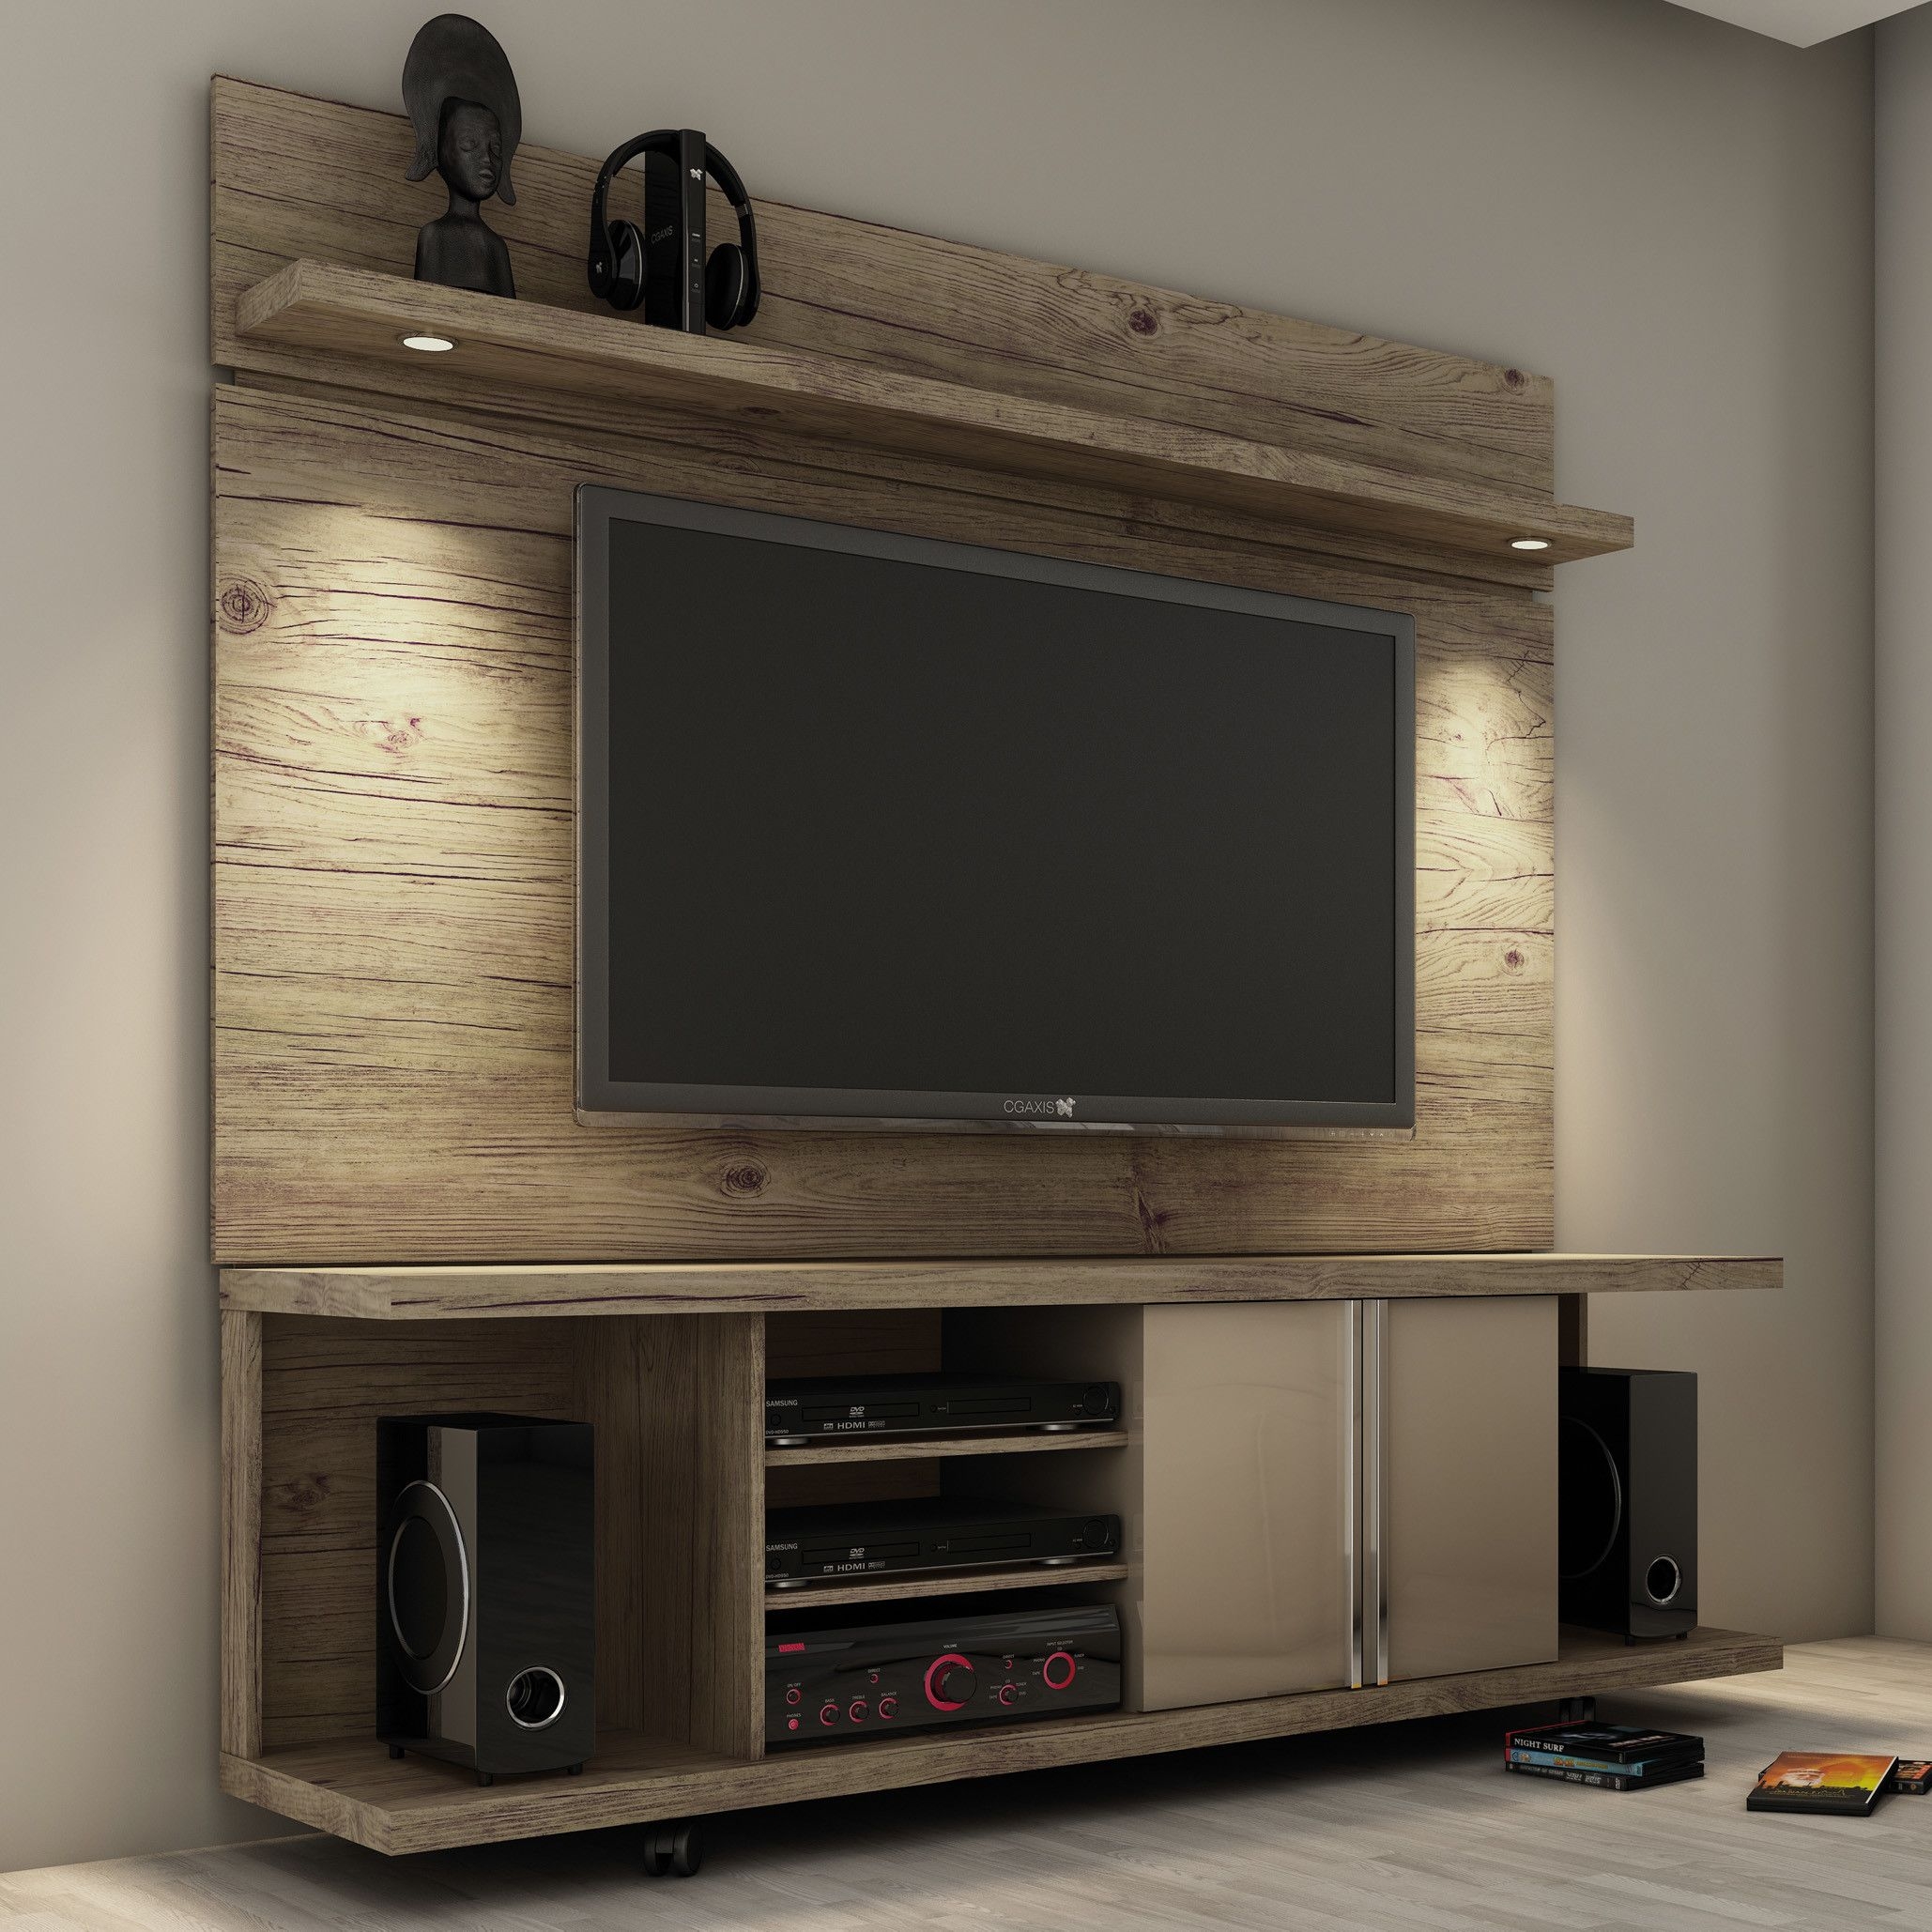 Tv stand with back panel